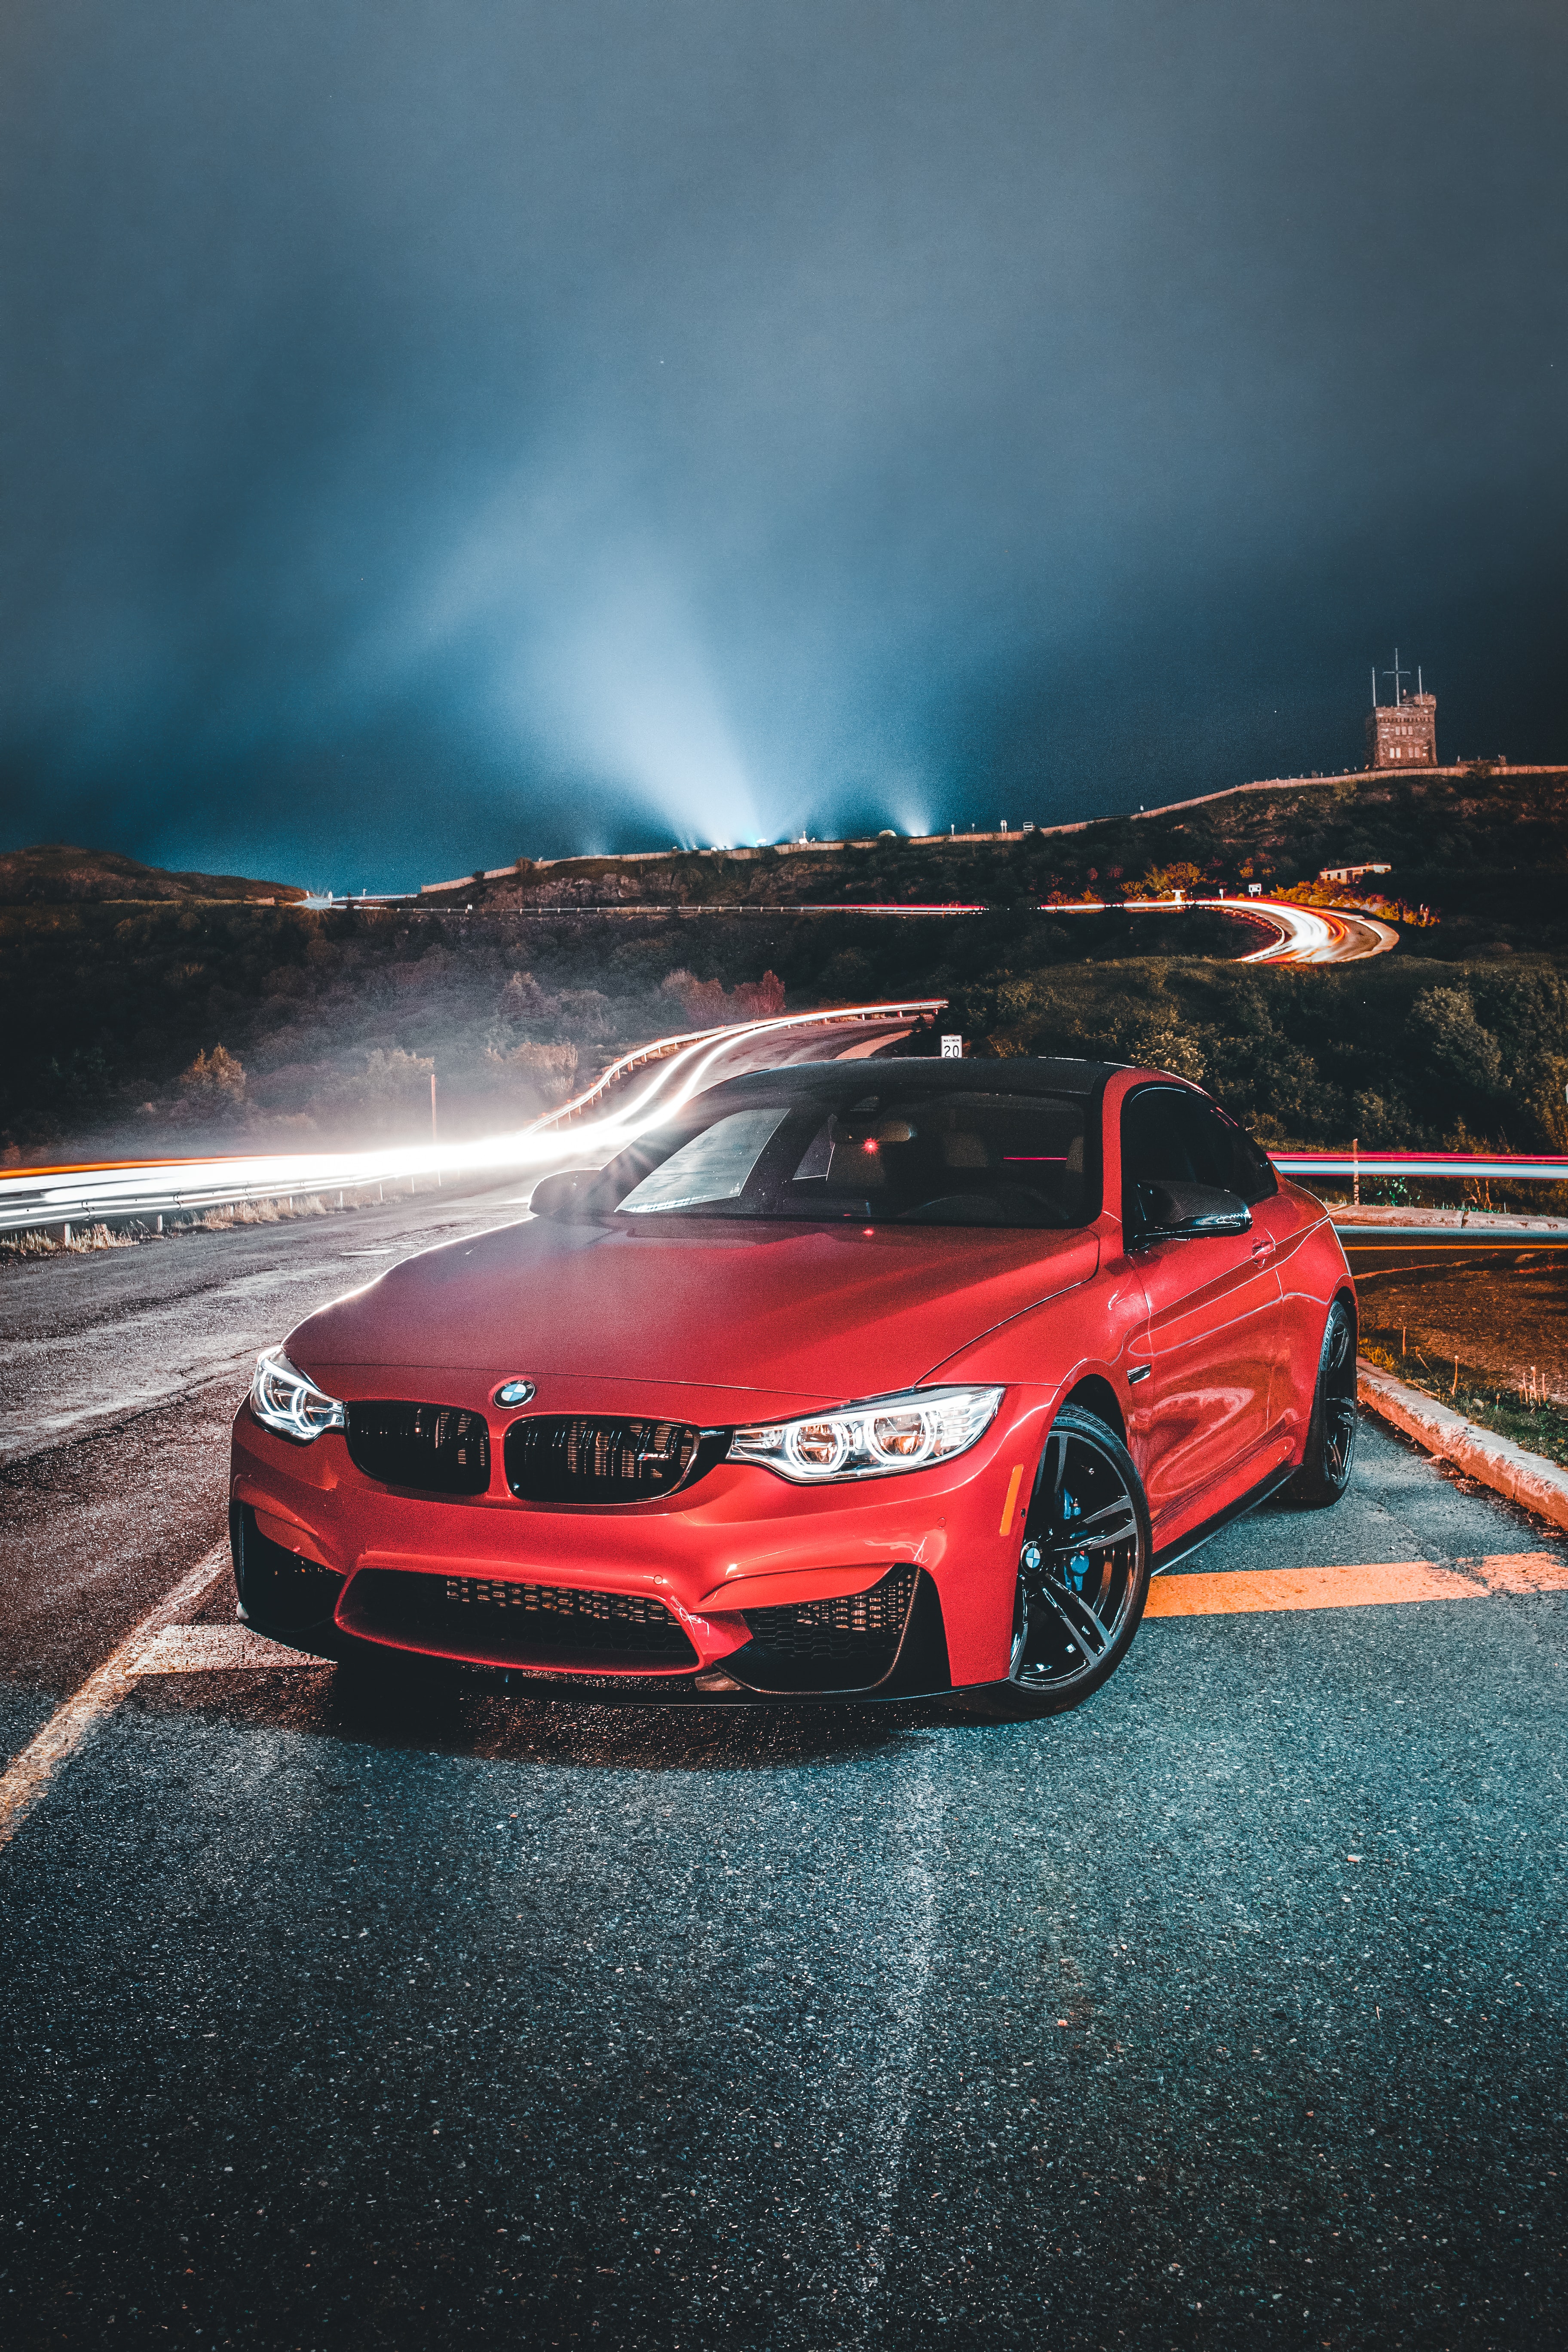 bmw 320i, bmw, front view, cars, red, road, car, machine High Definition image